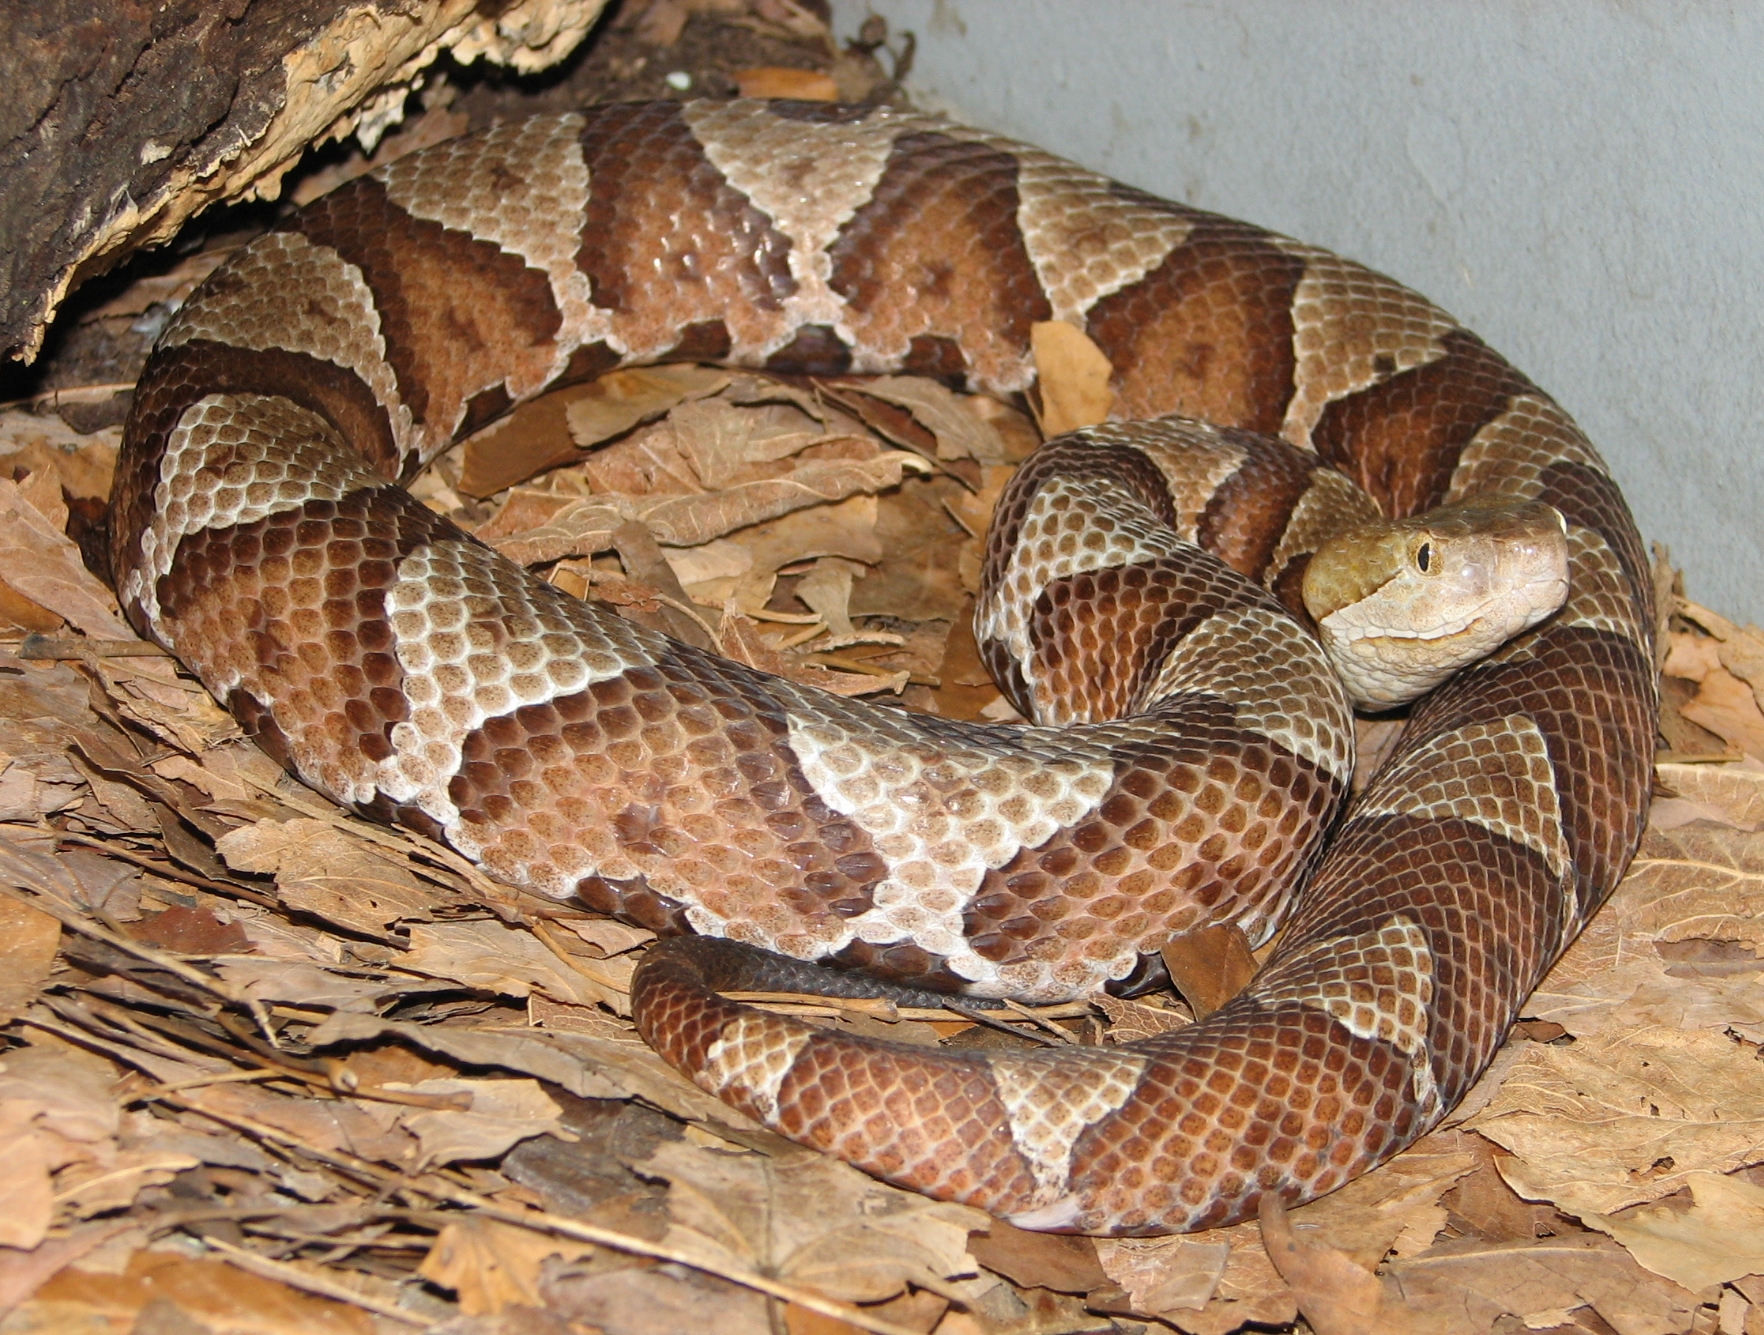 Kentucky's Venomous Snakes. Snakes and Spiders